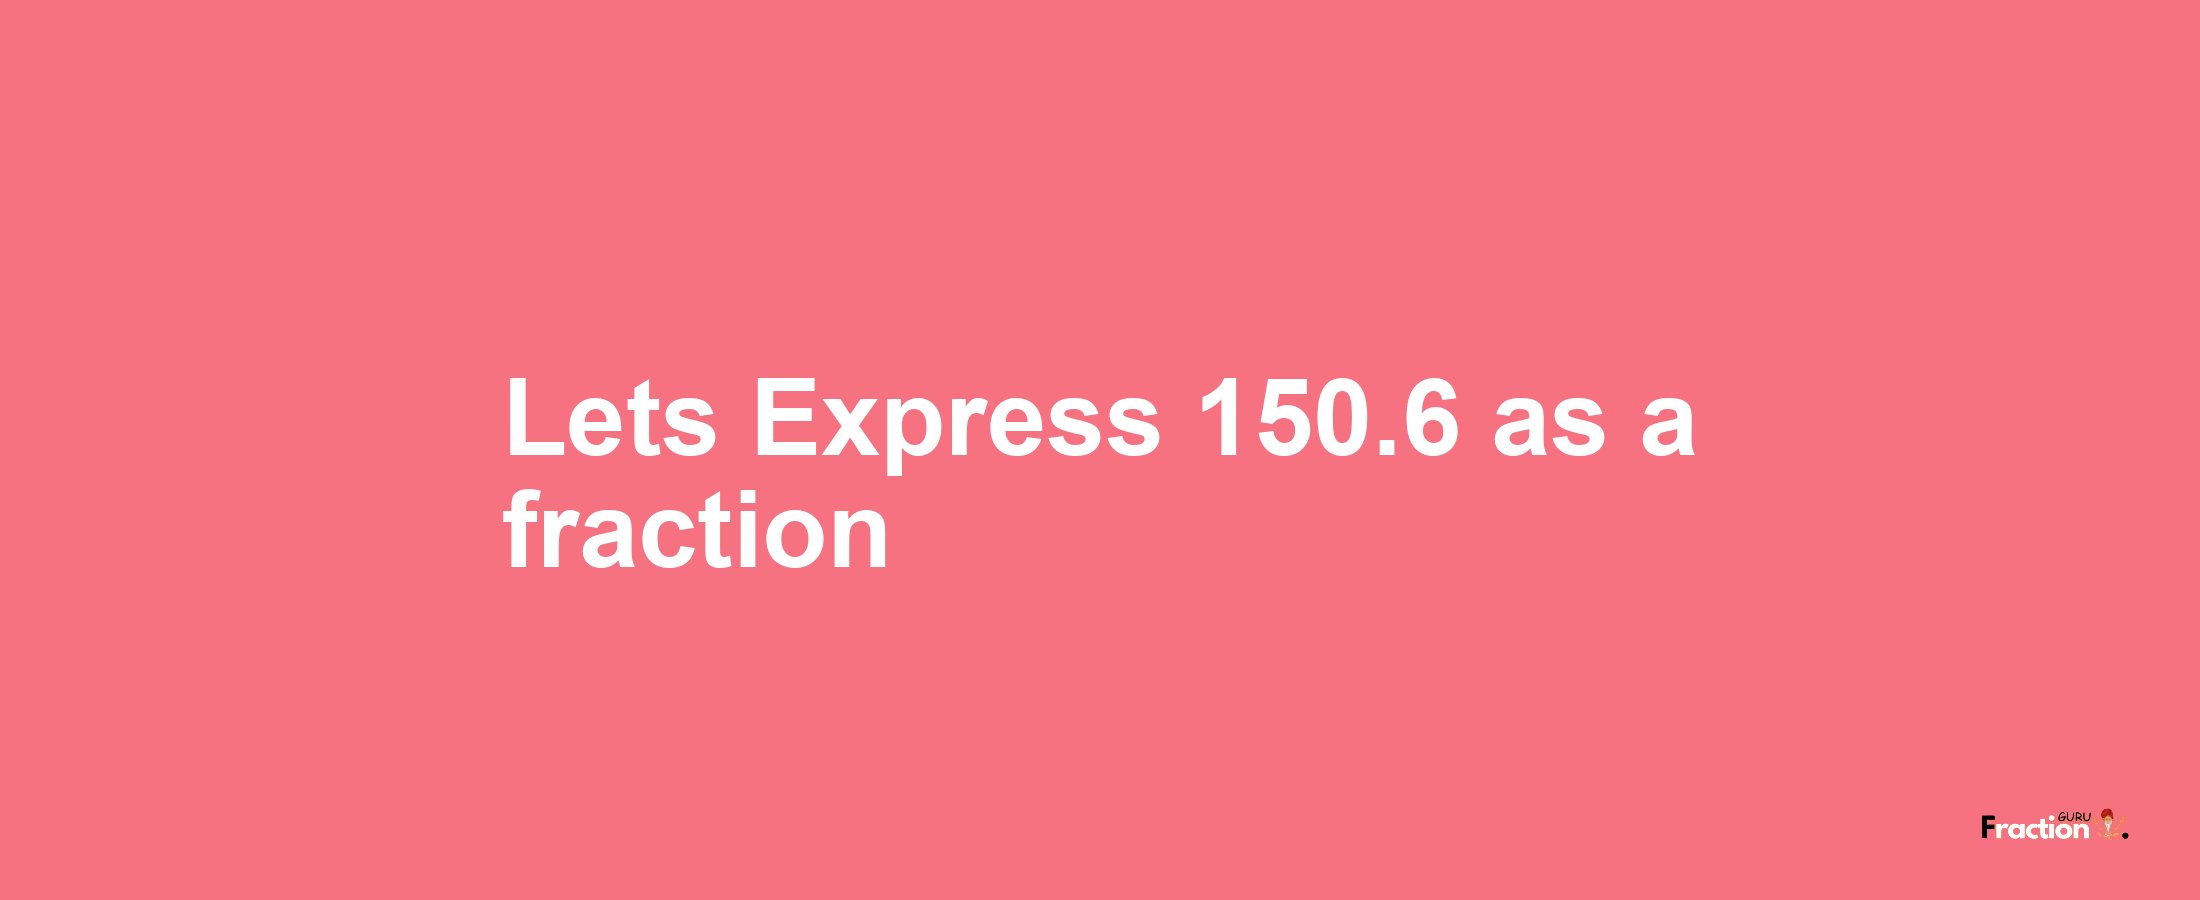 Lets Express 150.6 as afraction